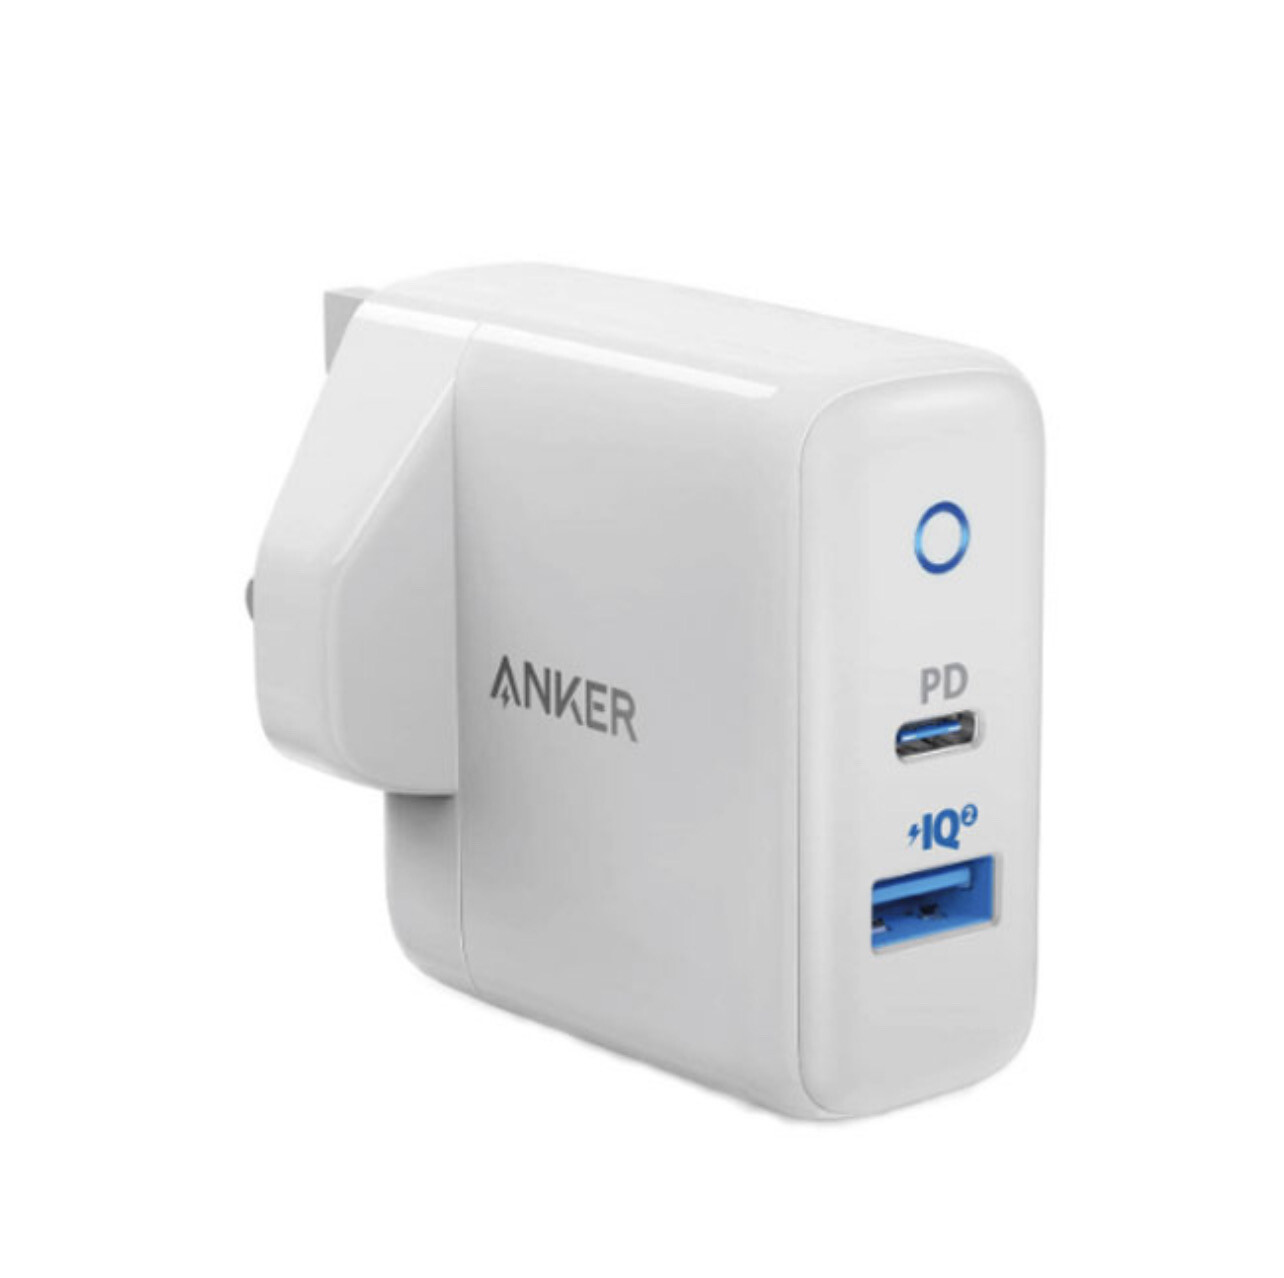 Adapter  Anker charging 2port  PD and USB ports fast charging one year warranty